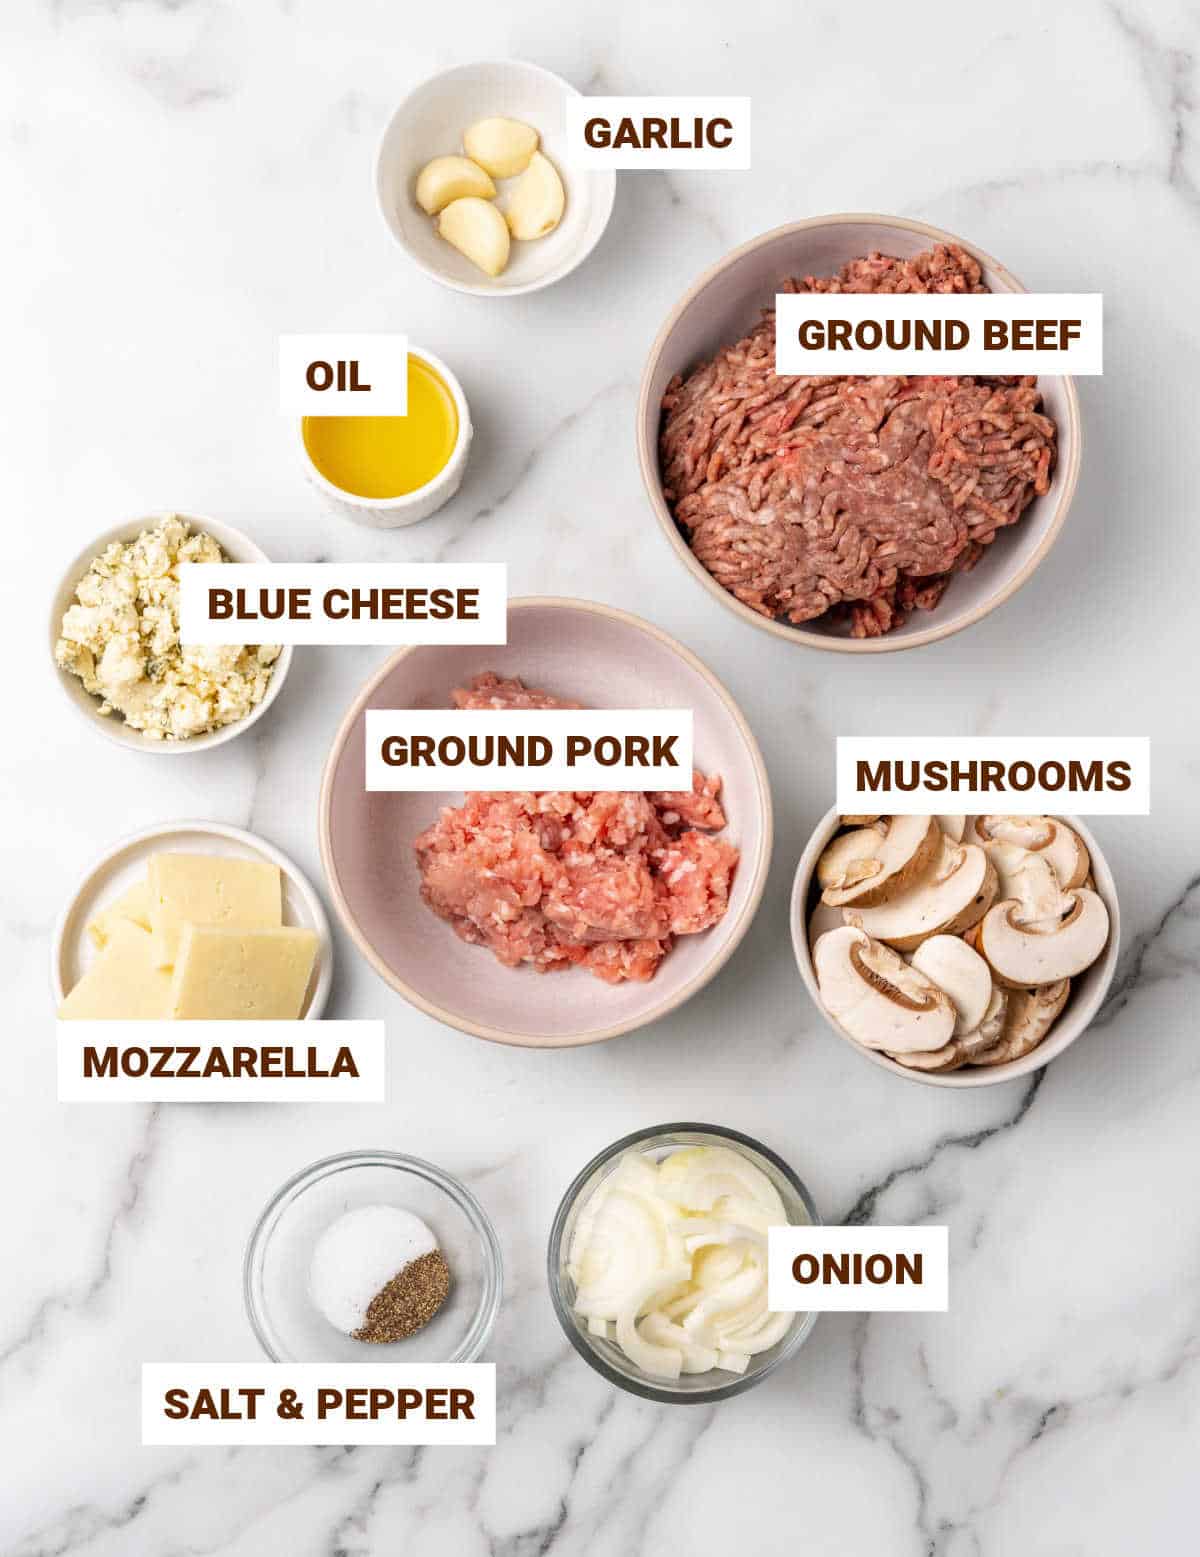 White marble surface with bowls containing ingredients for blue cheese burgers including mushrooms, garlic, cheeses, seasonings, ground meats.